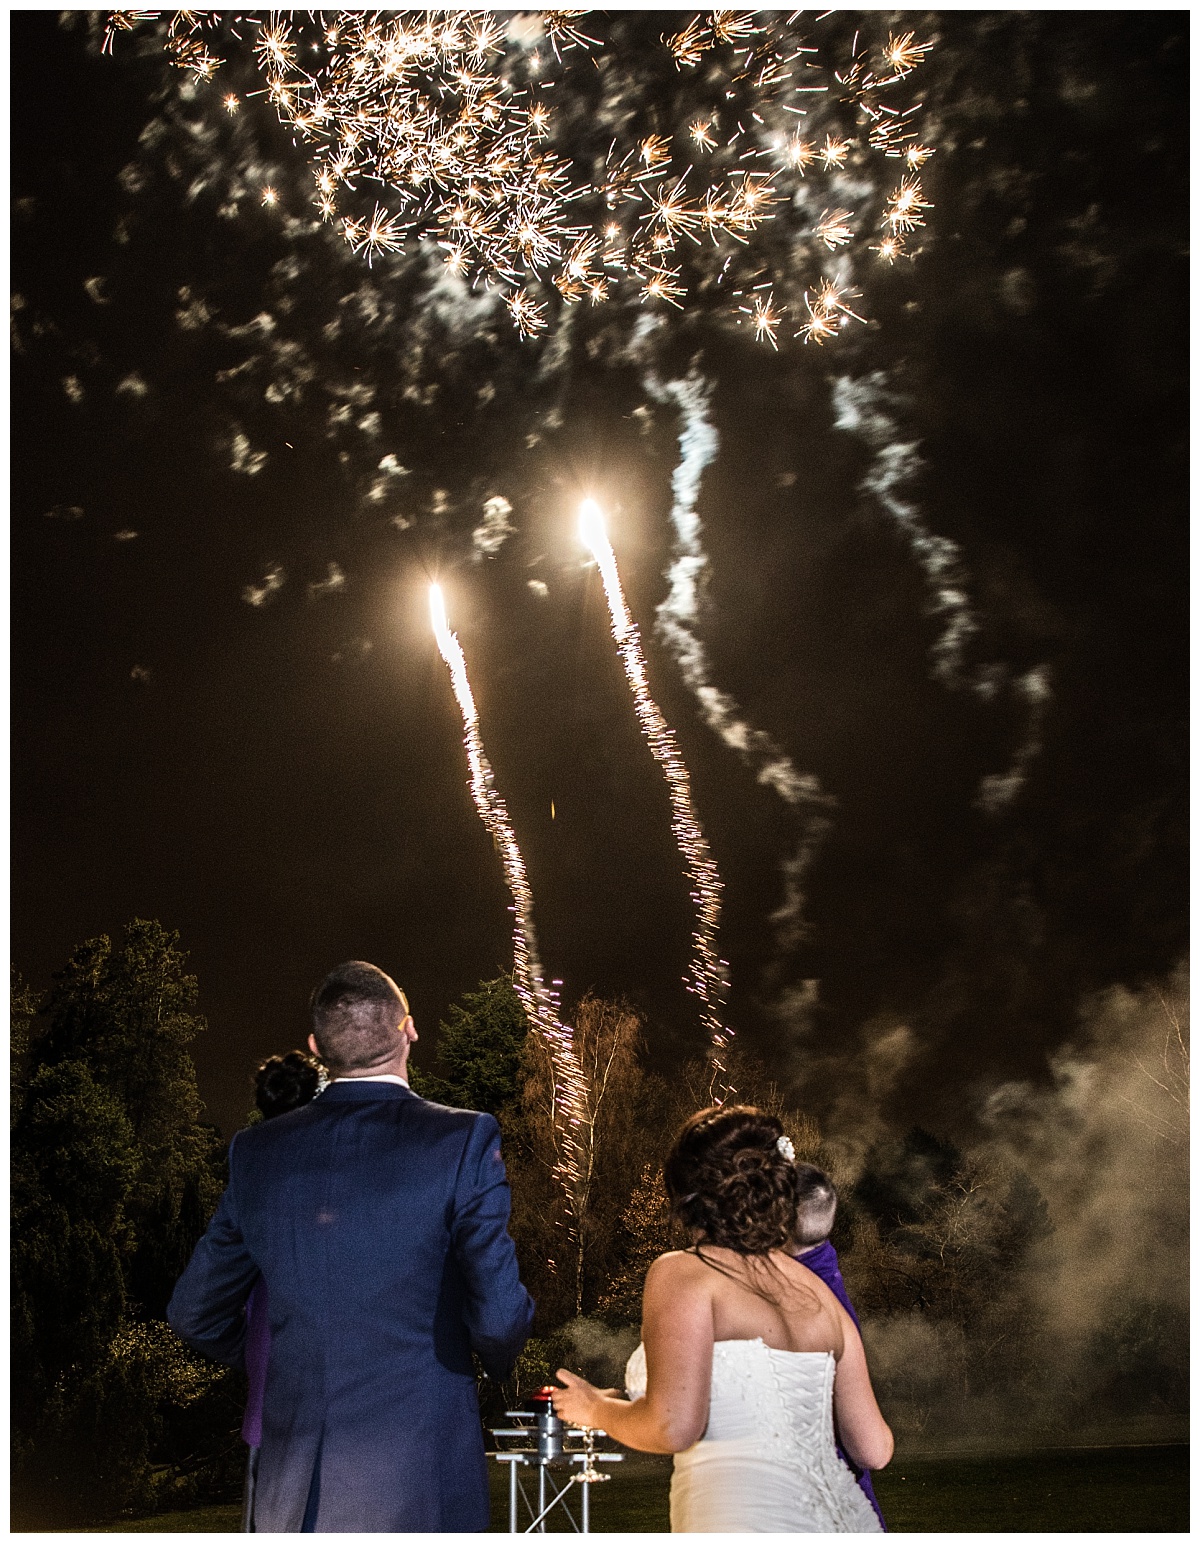 Wedding Photography Manchester - Jemma and Mark's Oddfellows On The Park NYE Wedding 1